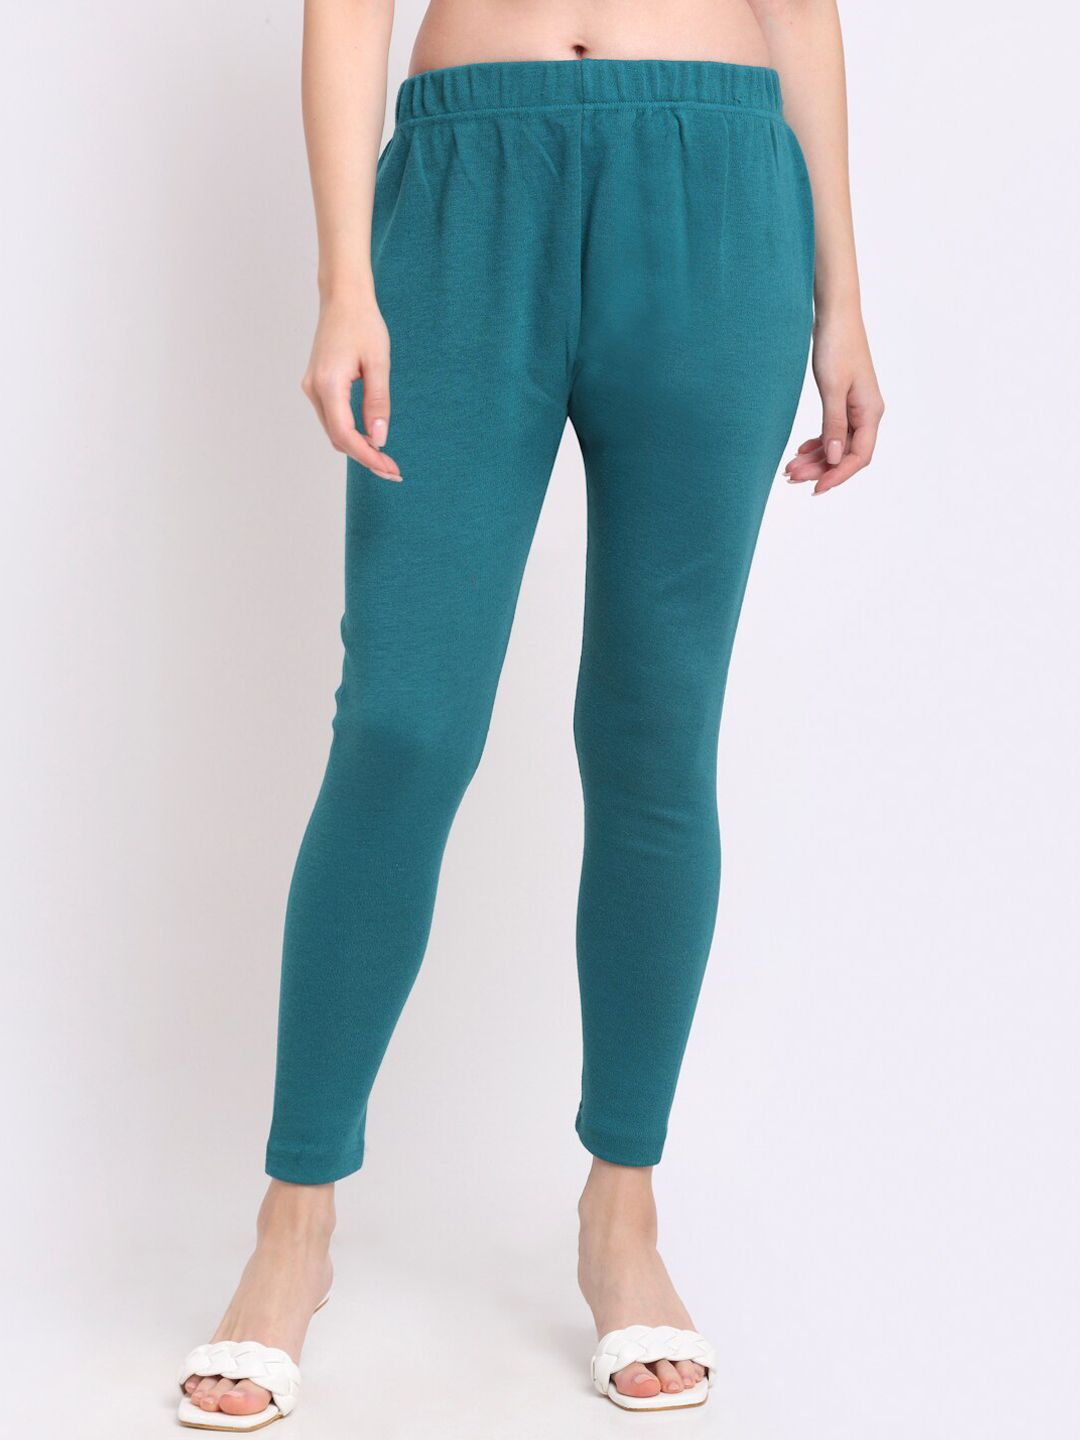 TAG 7 Women Turquoise Blue Woolen Ankle-Length Leggings Price in India